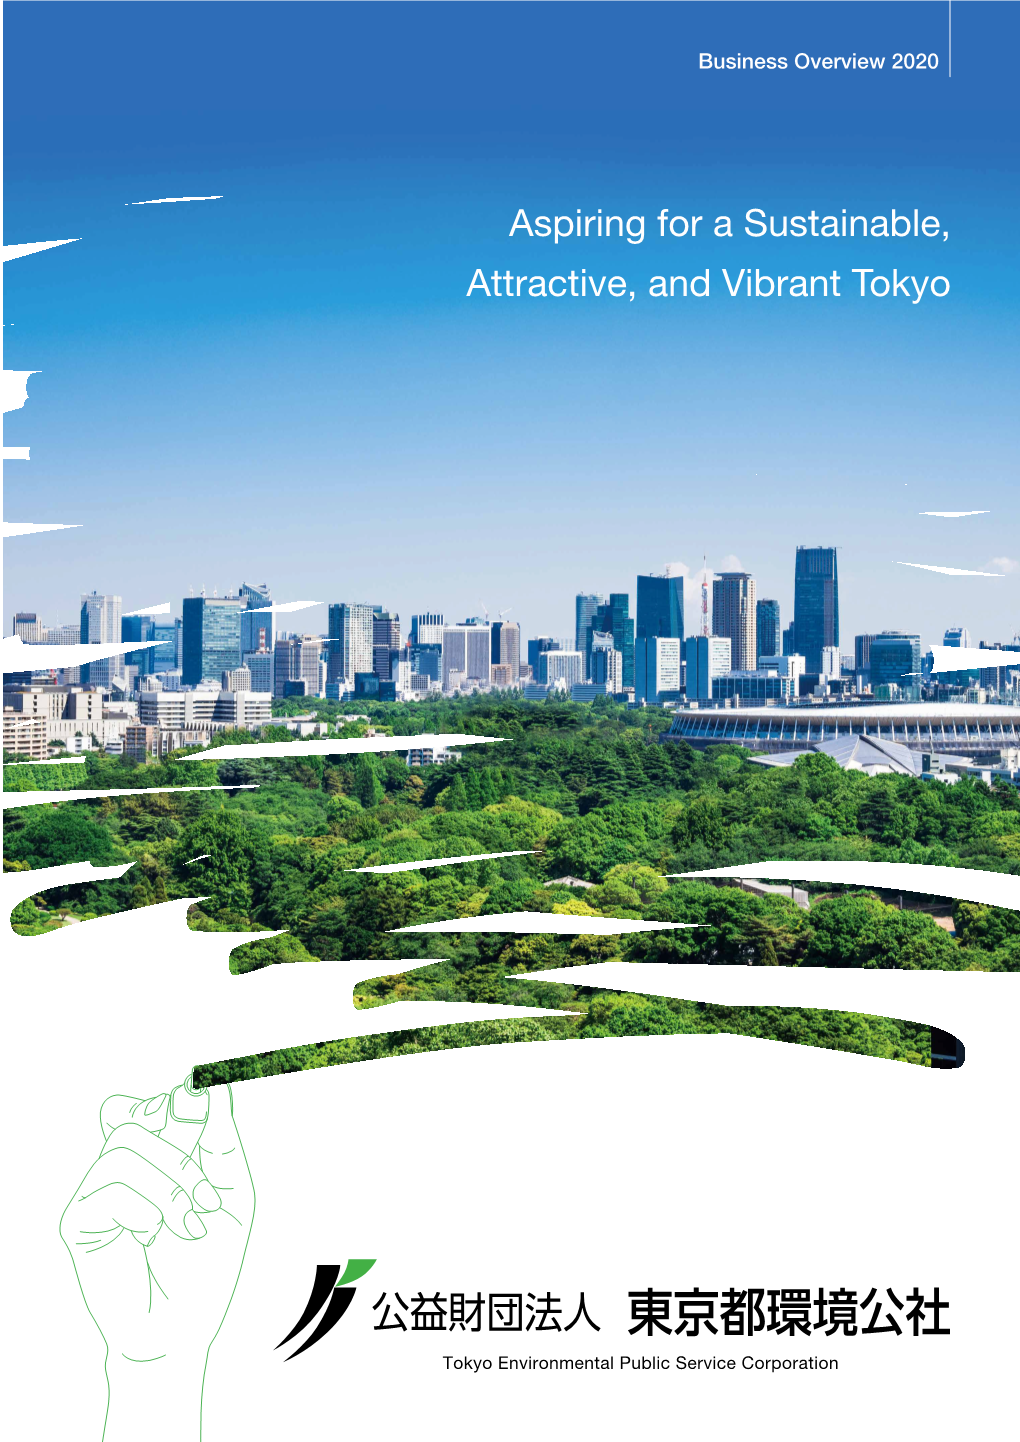 Aspiring for a Sustainable, Attractive, and Vibrant Tokyo